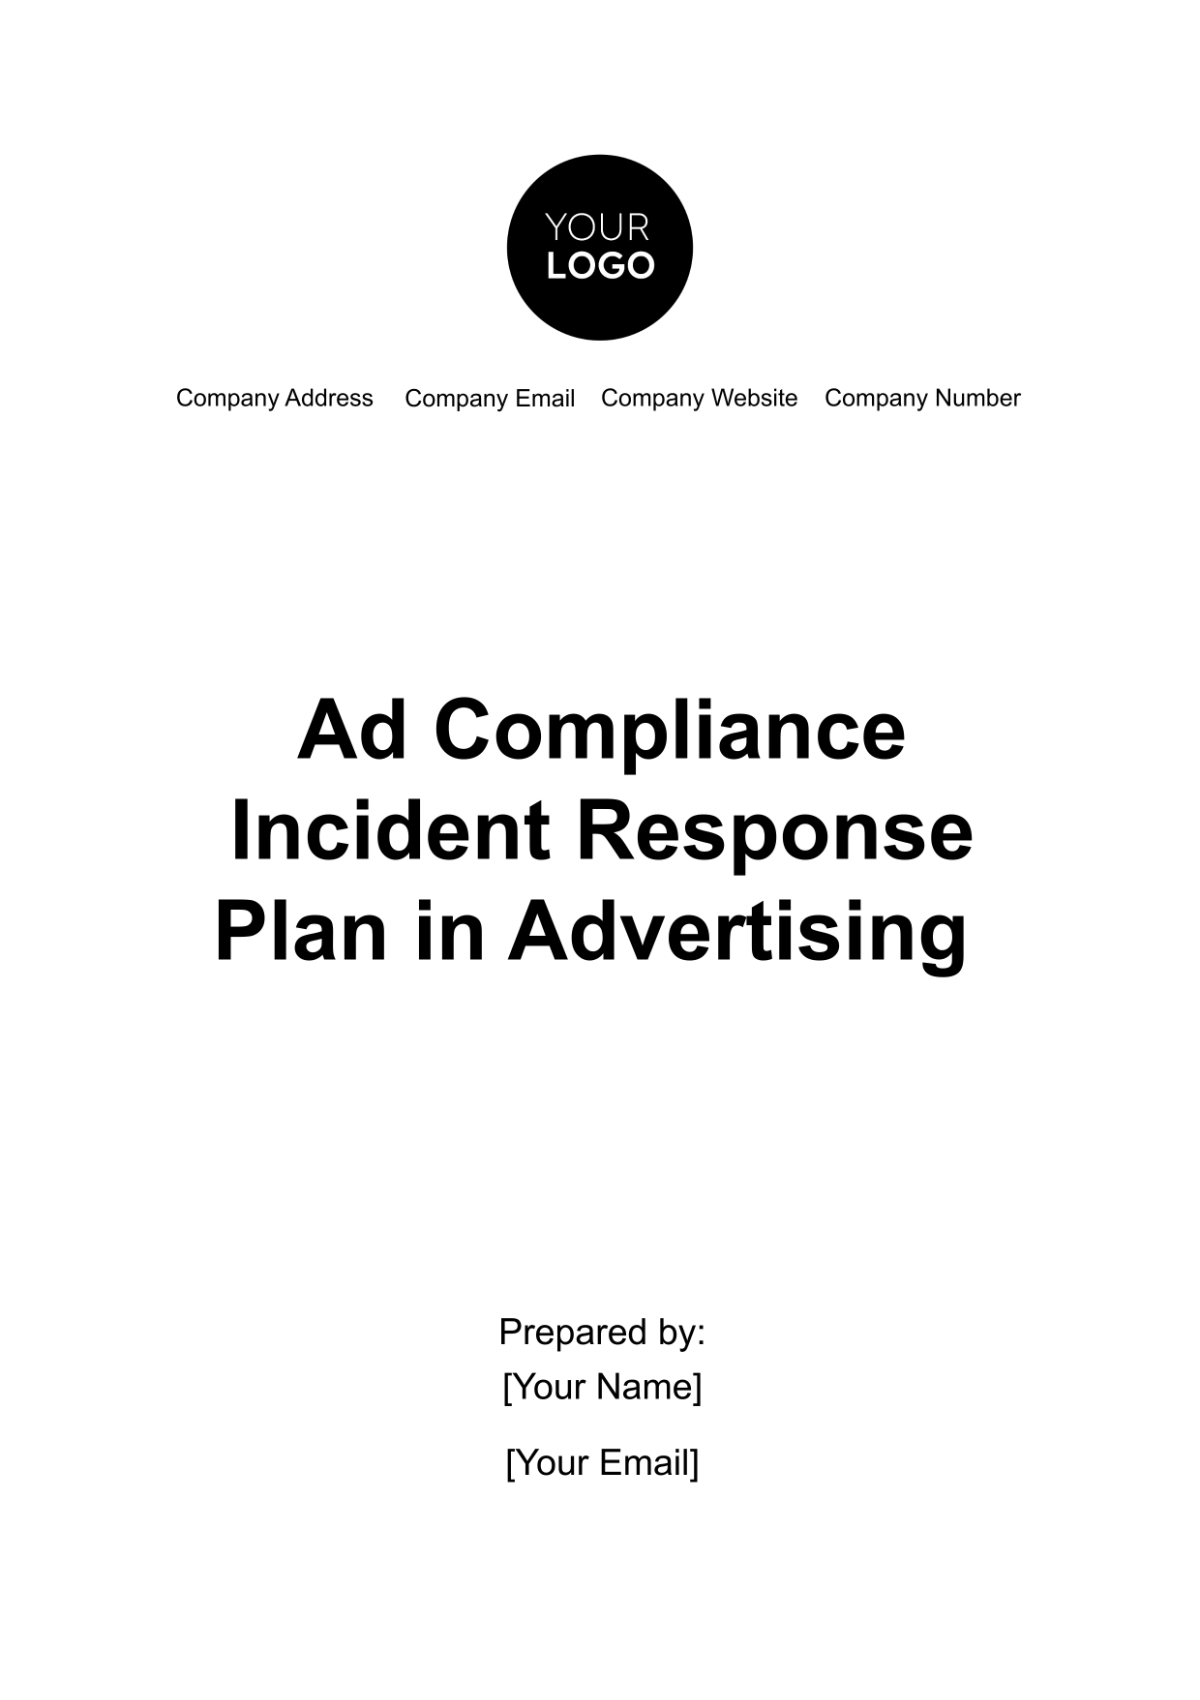 Ad Compliance Incident Response Plan in Advertising Template